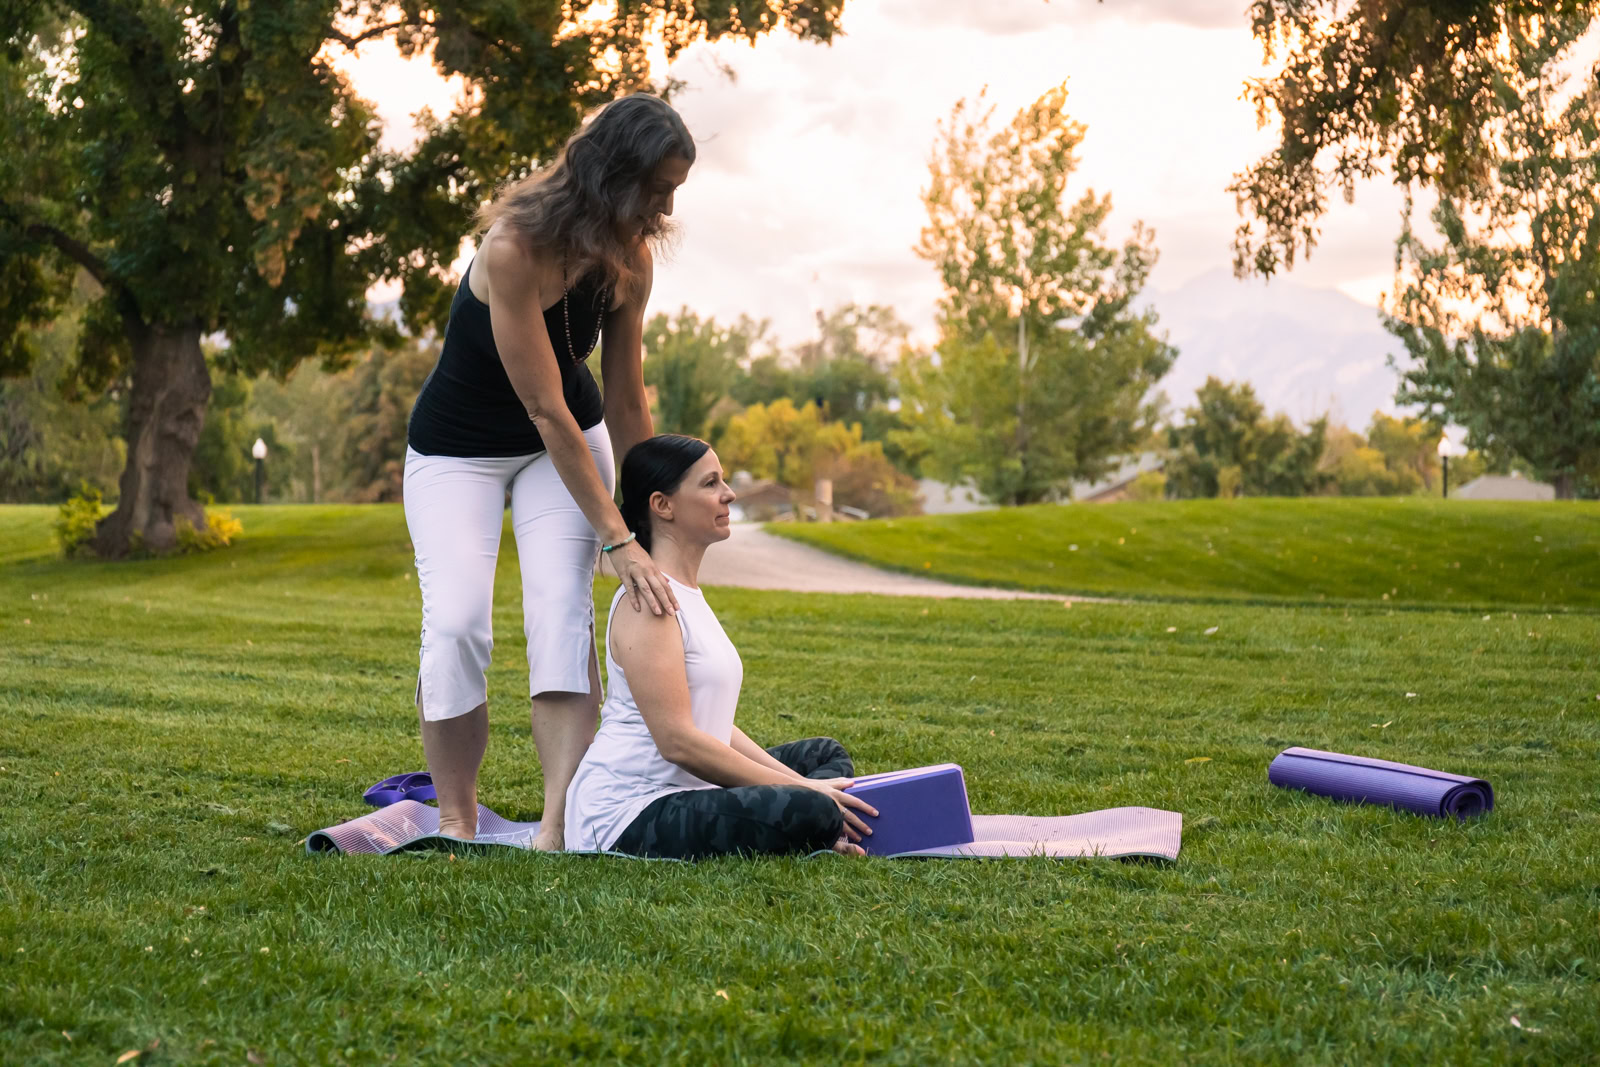 Two people are practicing yoga in an outdoor park; one is sitting on a mat with a yoga block, while Danae Robinett stands behind, assisting with a shoulder adjustment. Danae Robinett's techniques are empowering women through breath and mindful movements.